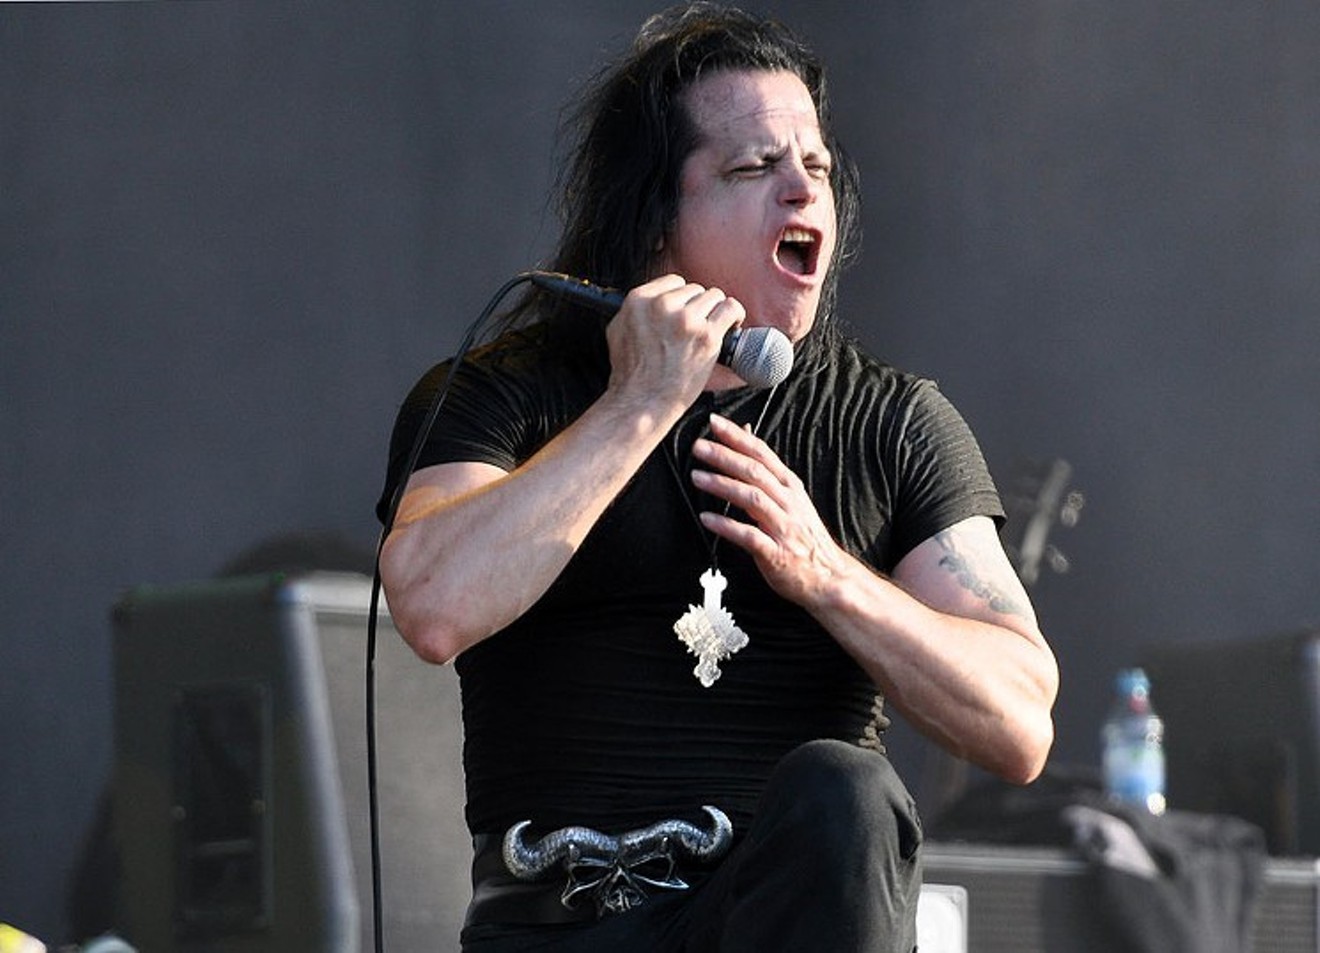 Phoenix New Times does not recommend punching anyone, including Glenn Danzig, in the face.